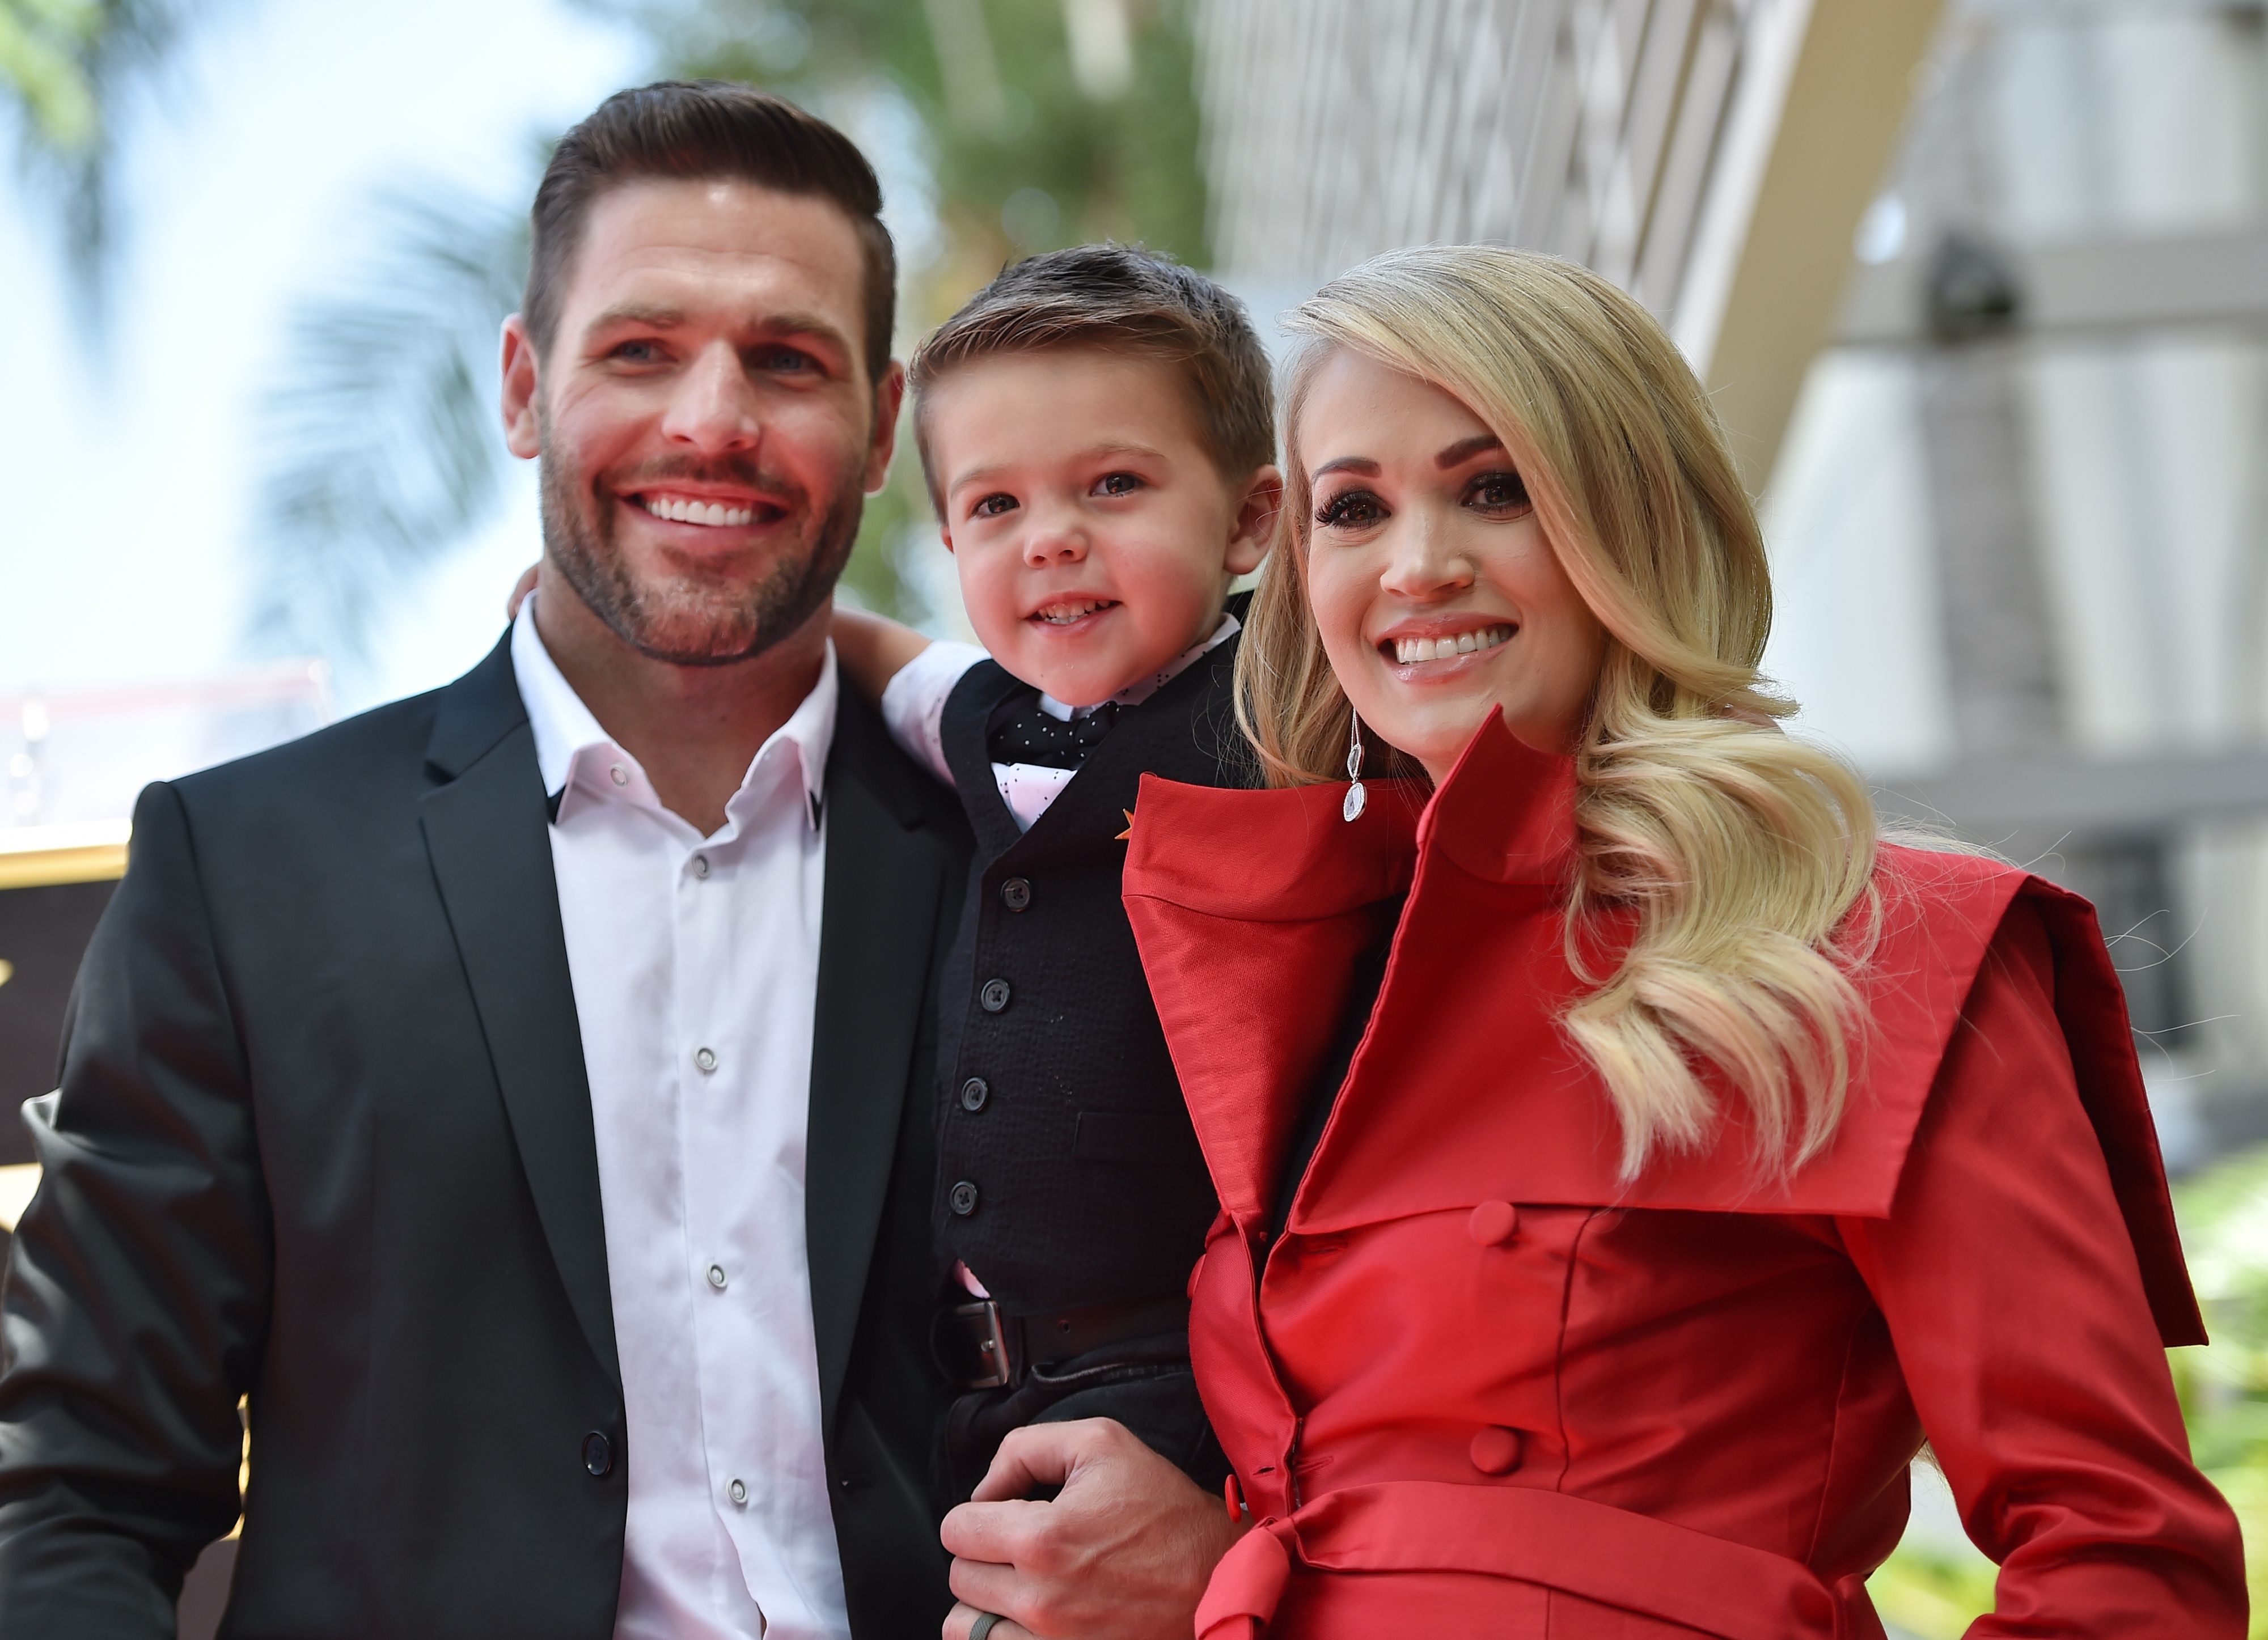 Carrie Underwood poses with her husband Mike Fisher and their 3-year-old son Isaiah Michael at her star unveiling ceremony on the Hollywood Walk of Fame, September 20, 2018 in Hollywood, California | Source: Getty Images